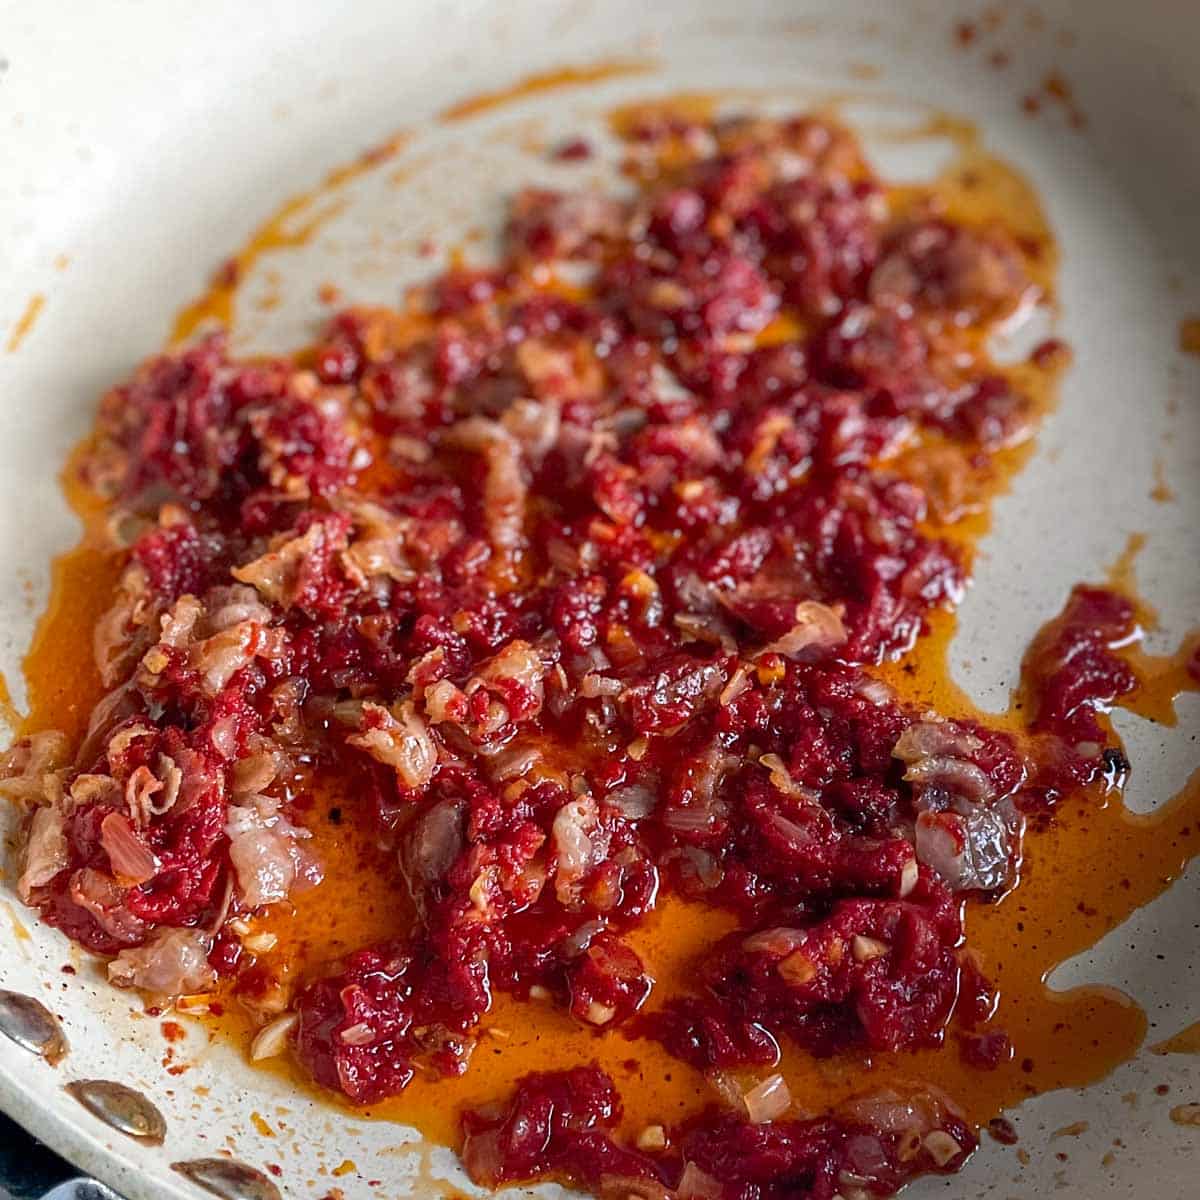 Tomato paste is added to the garlic, shallot, olive oil, and pancetta mixture.